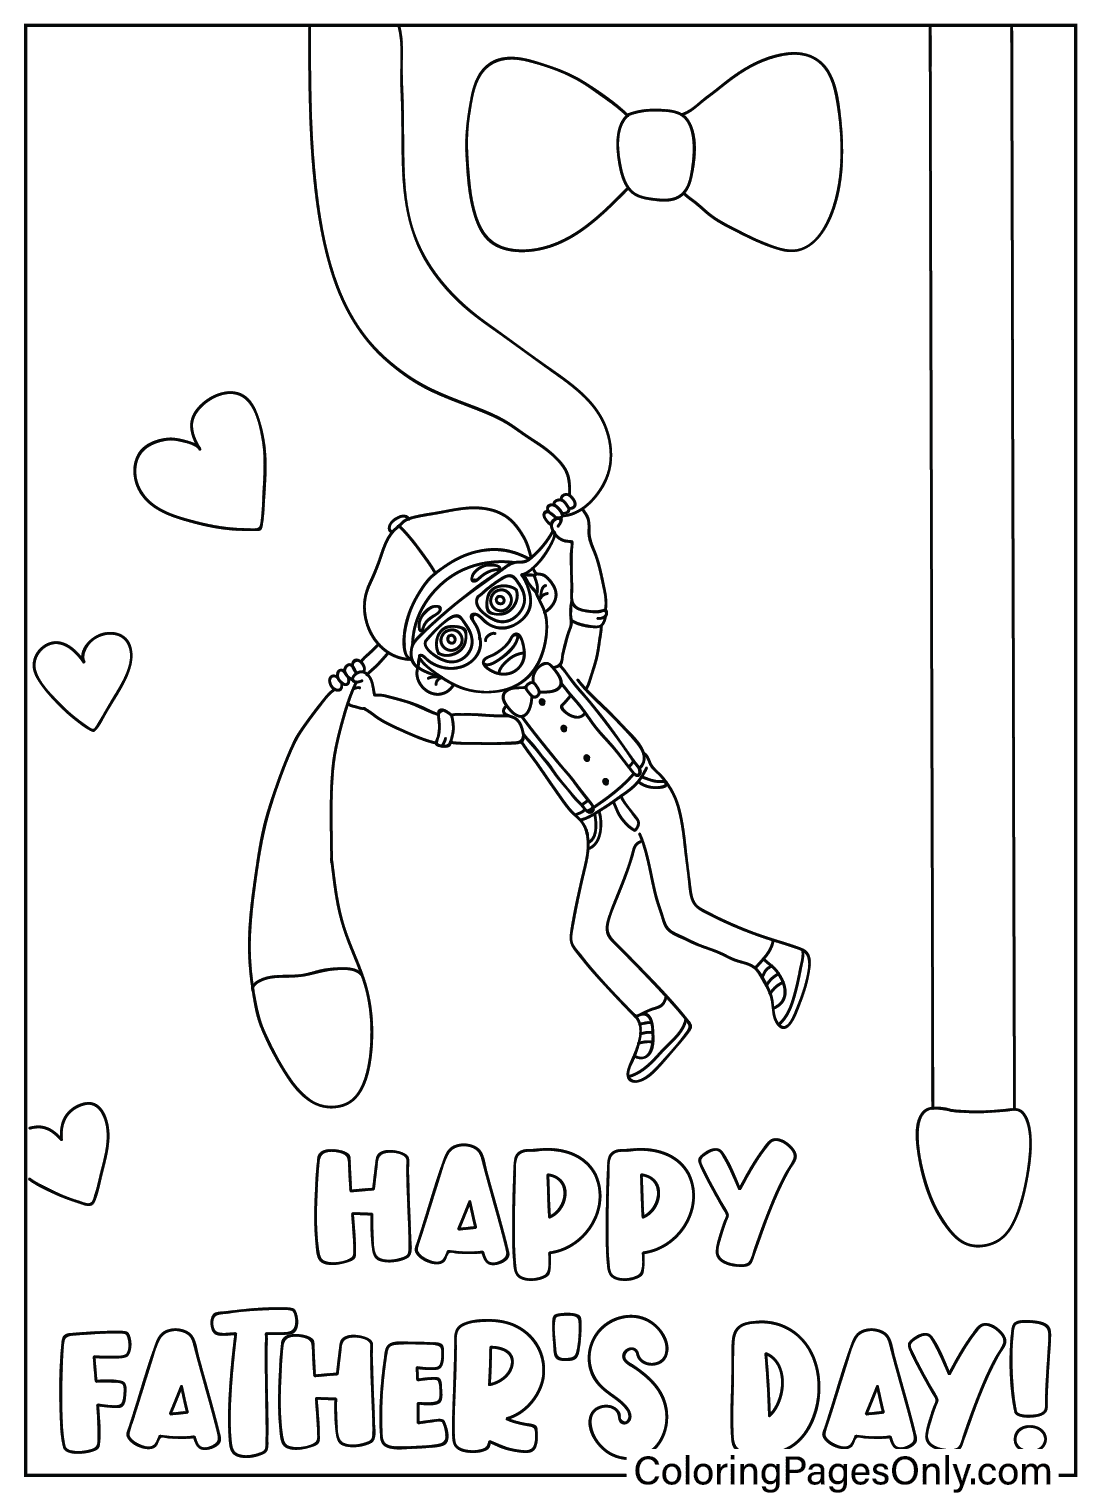 Coloring Page Blippi from Blippi